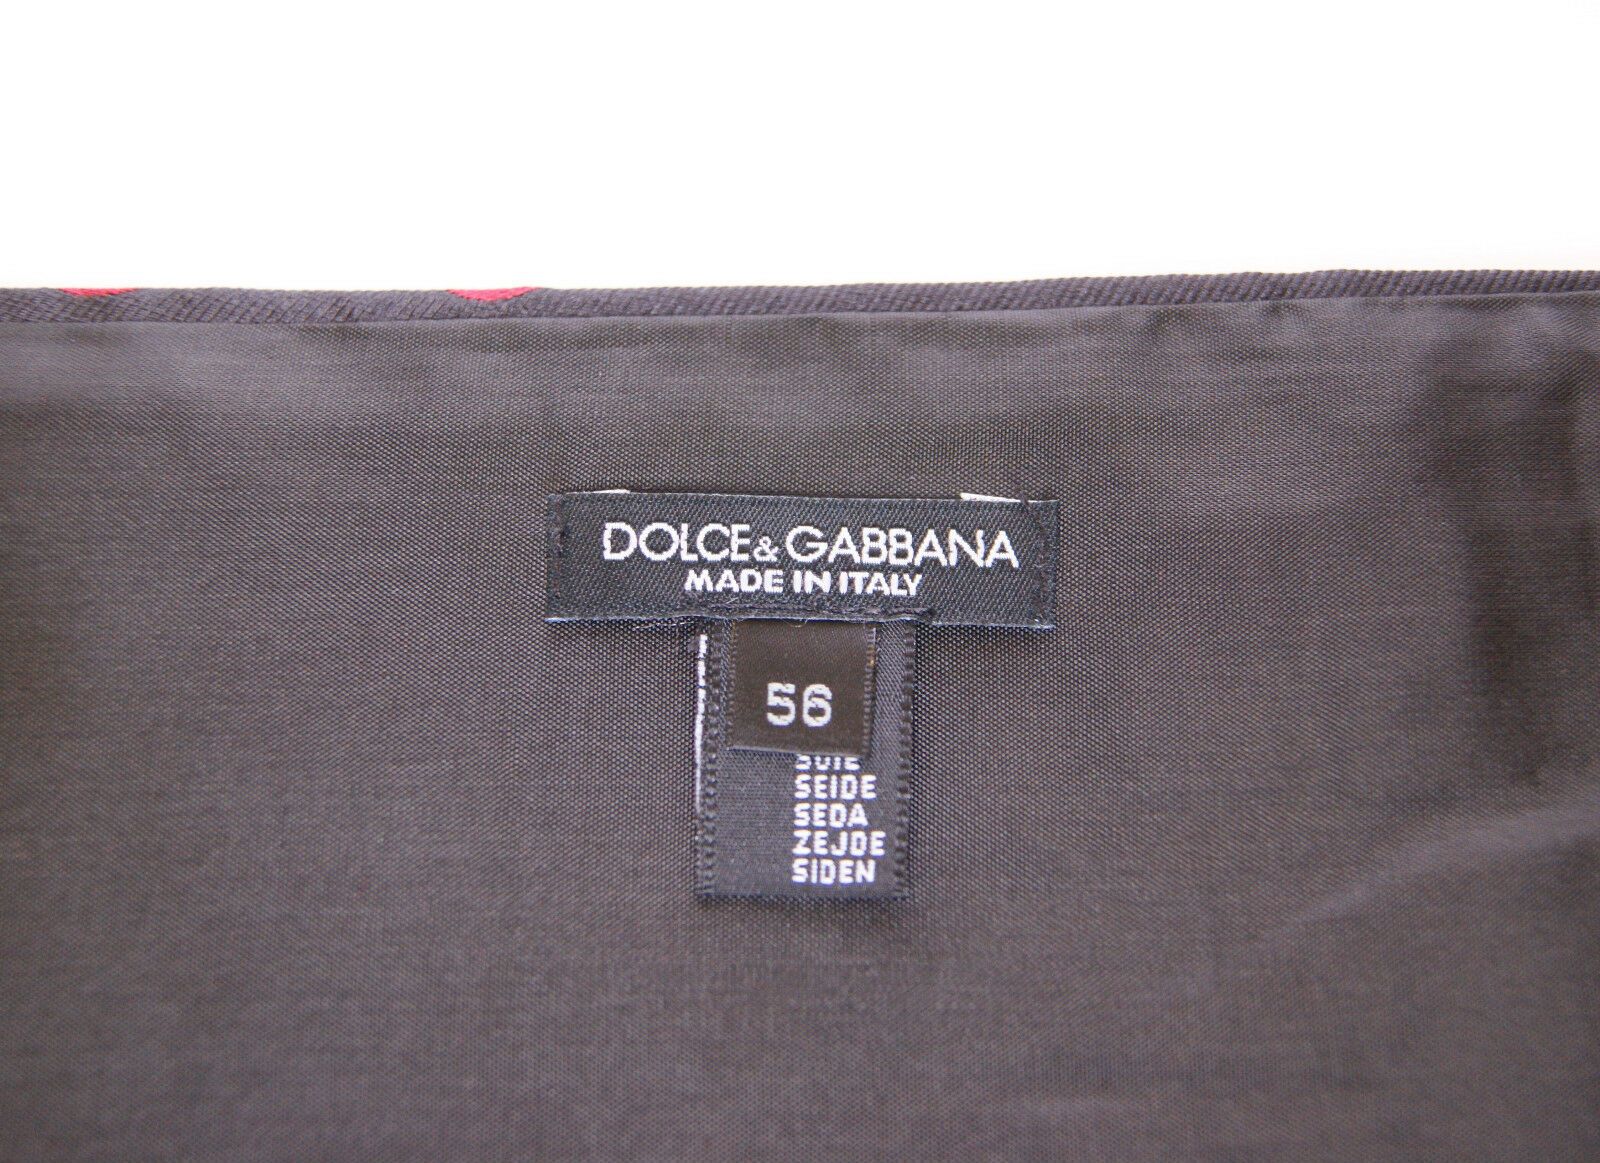 Black Waist Smoking Tuxedo Cummerbund Belt - Designed by Dolce & Gabbana Available to Buy at a Discounted Price on Moon Behind The Hill Online Designer Discount Store